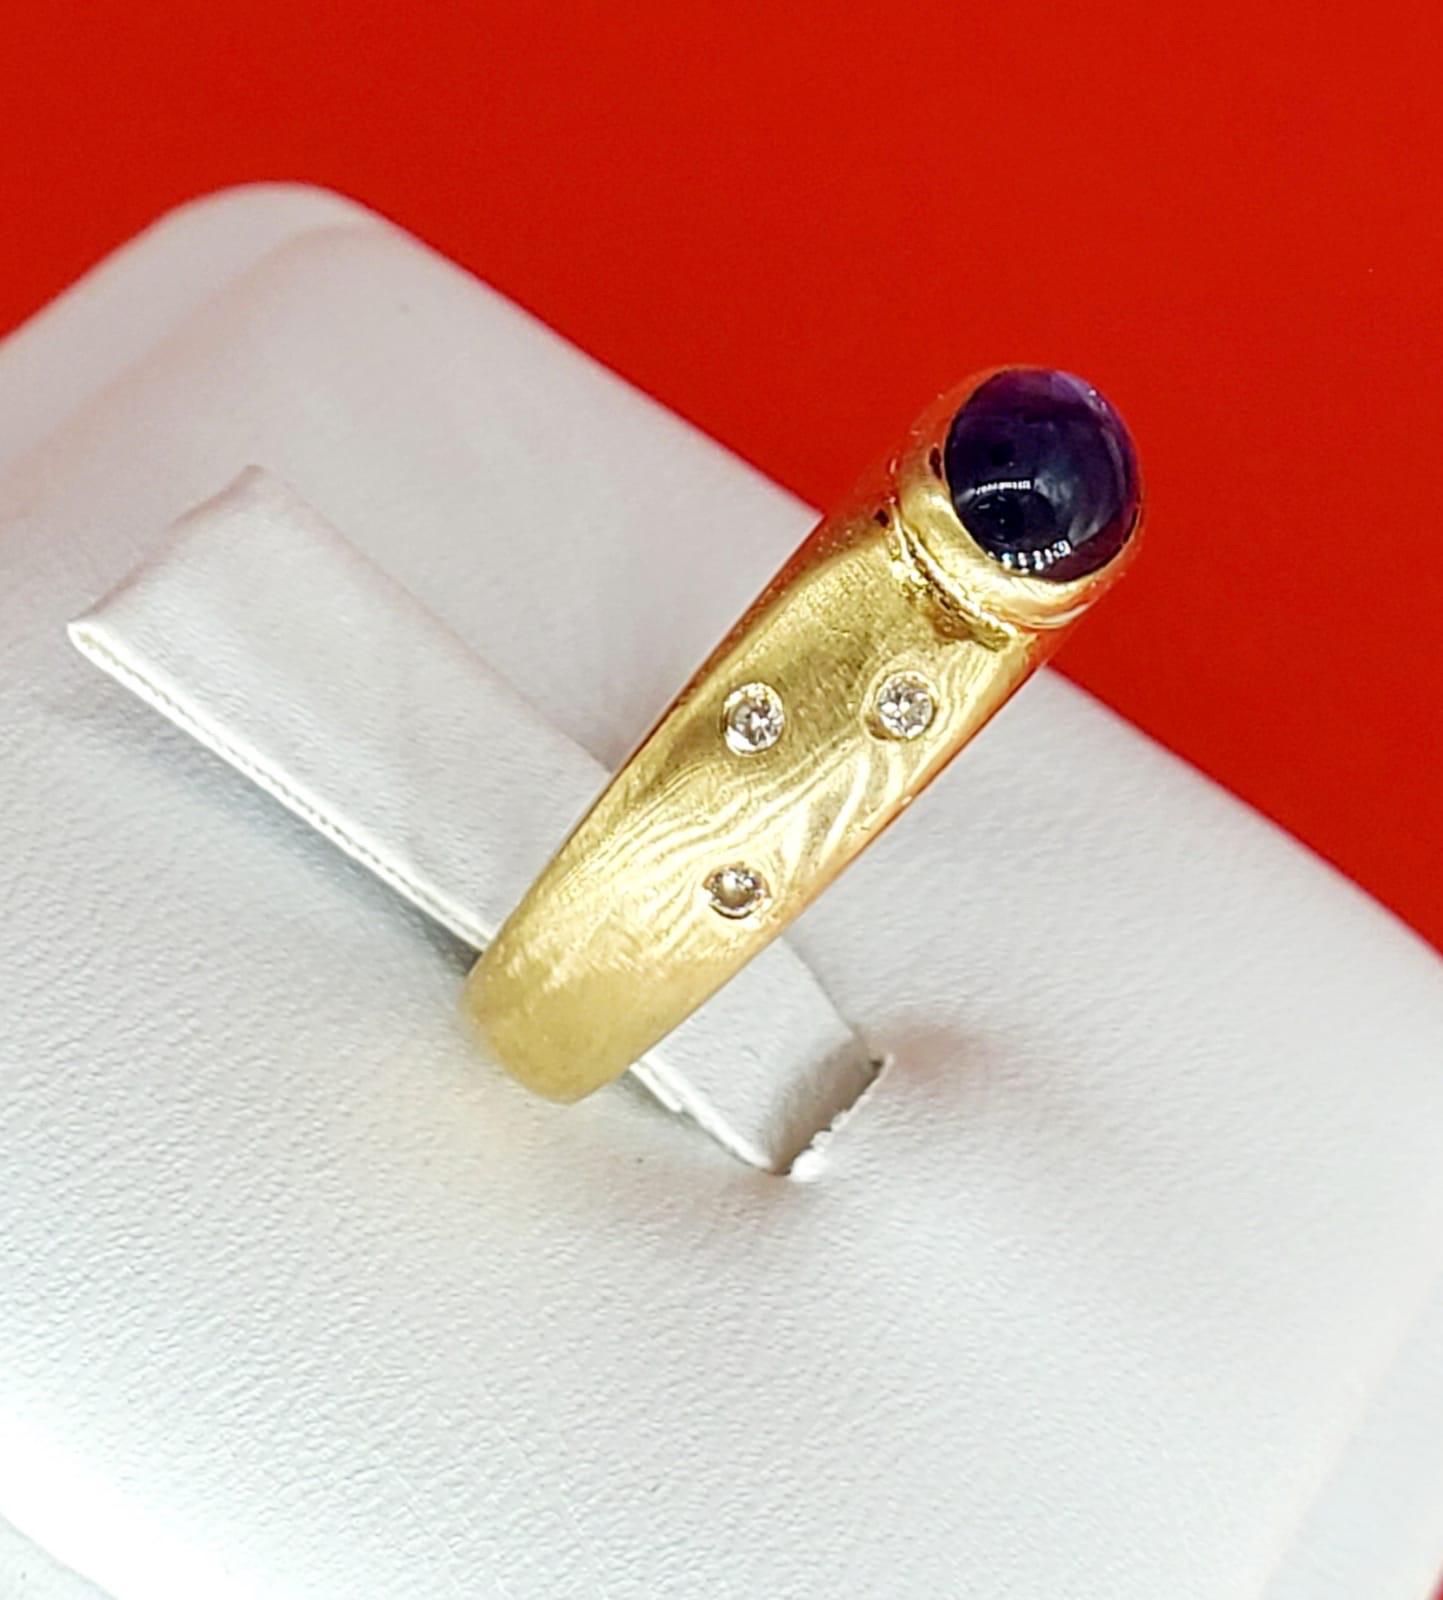 1 Carat Sapphire Cabochon and Diamonds Etoile Star Galaxy Ring 18 Karat Gold In Excellent Condition For Sale In Miami, FL